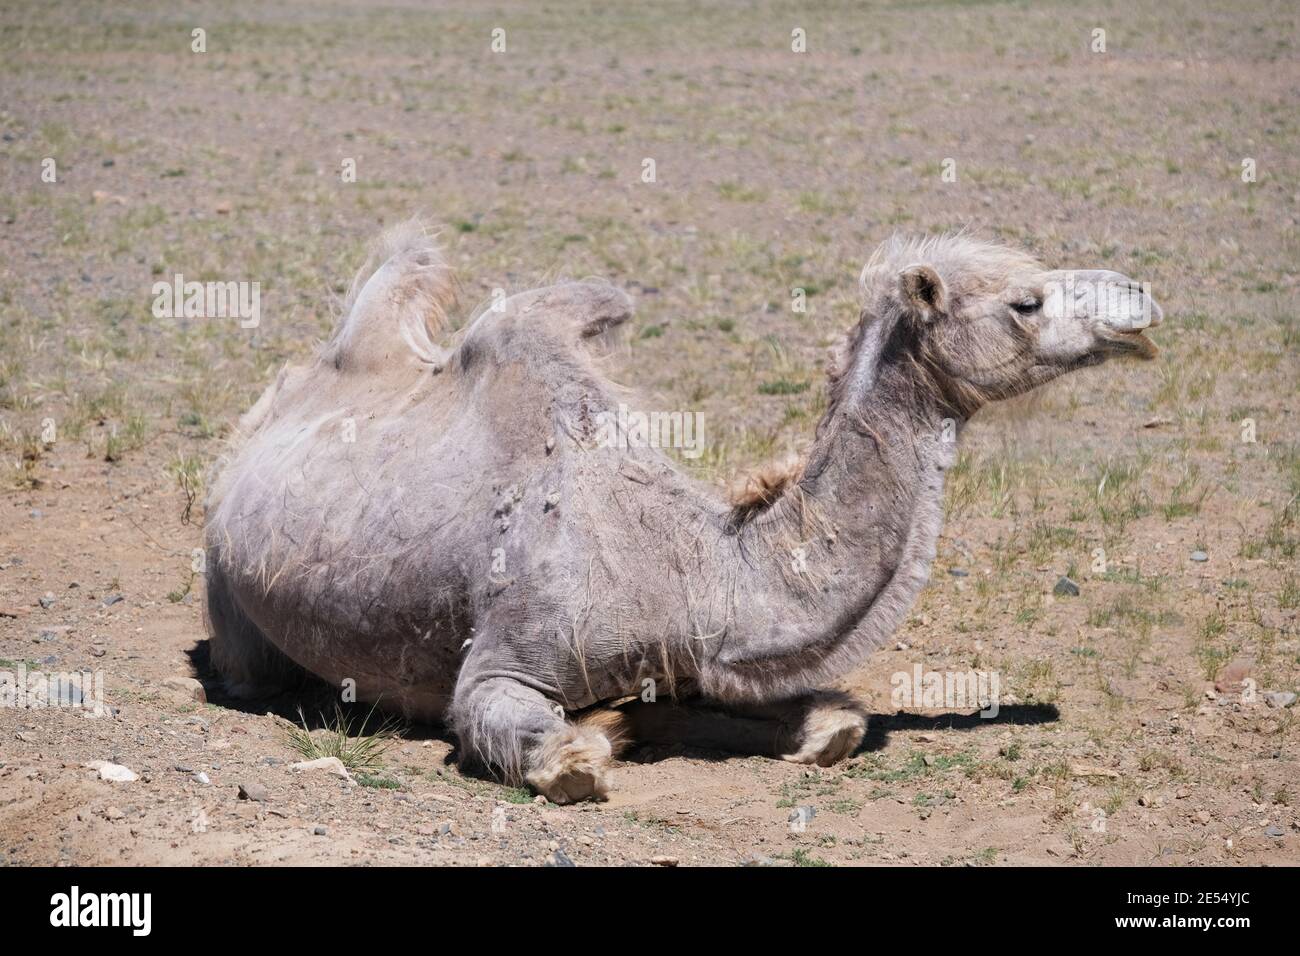 A camel graze in the stone desert of Western Mongolia Stock Photo - Alamy